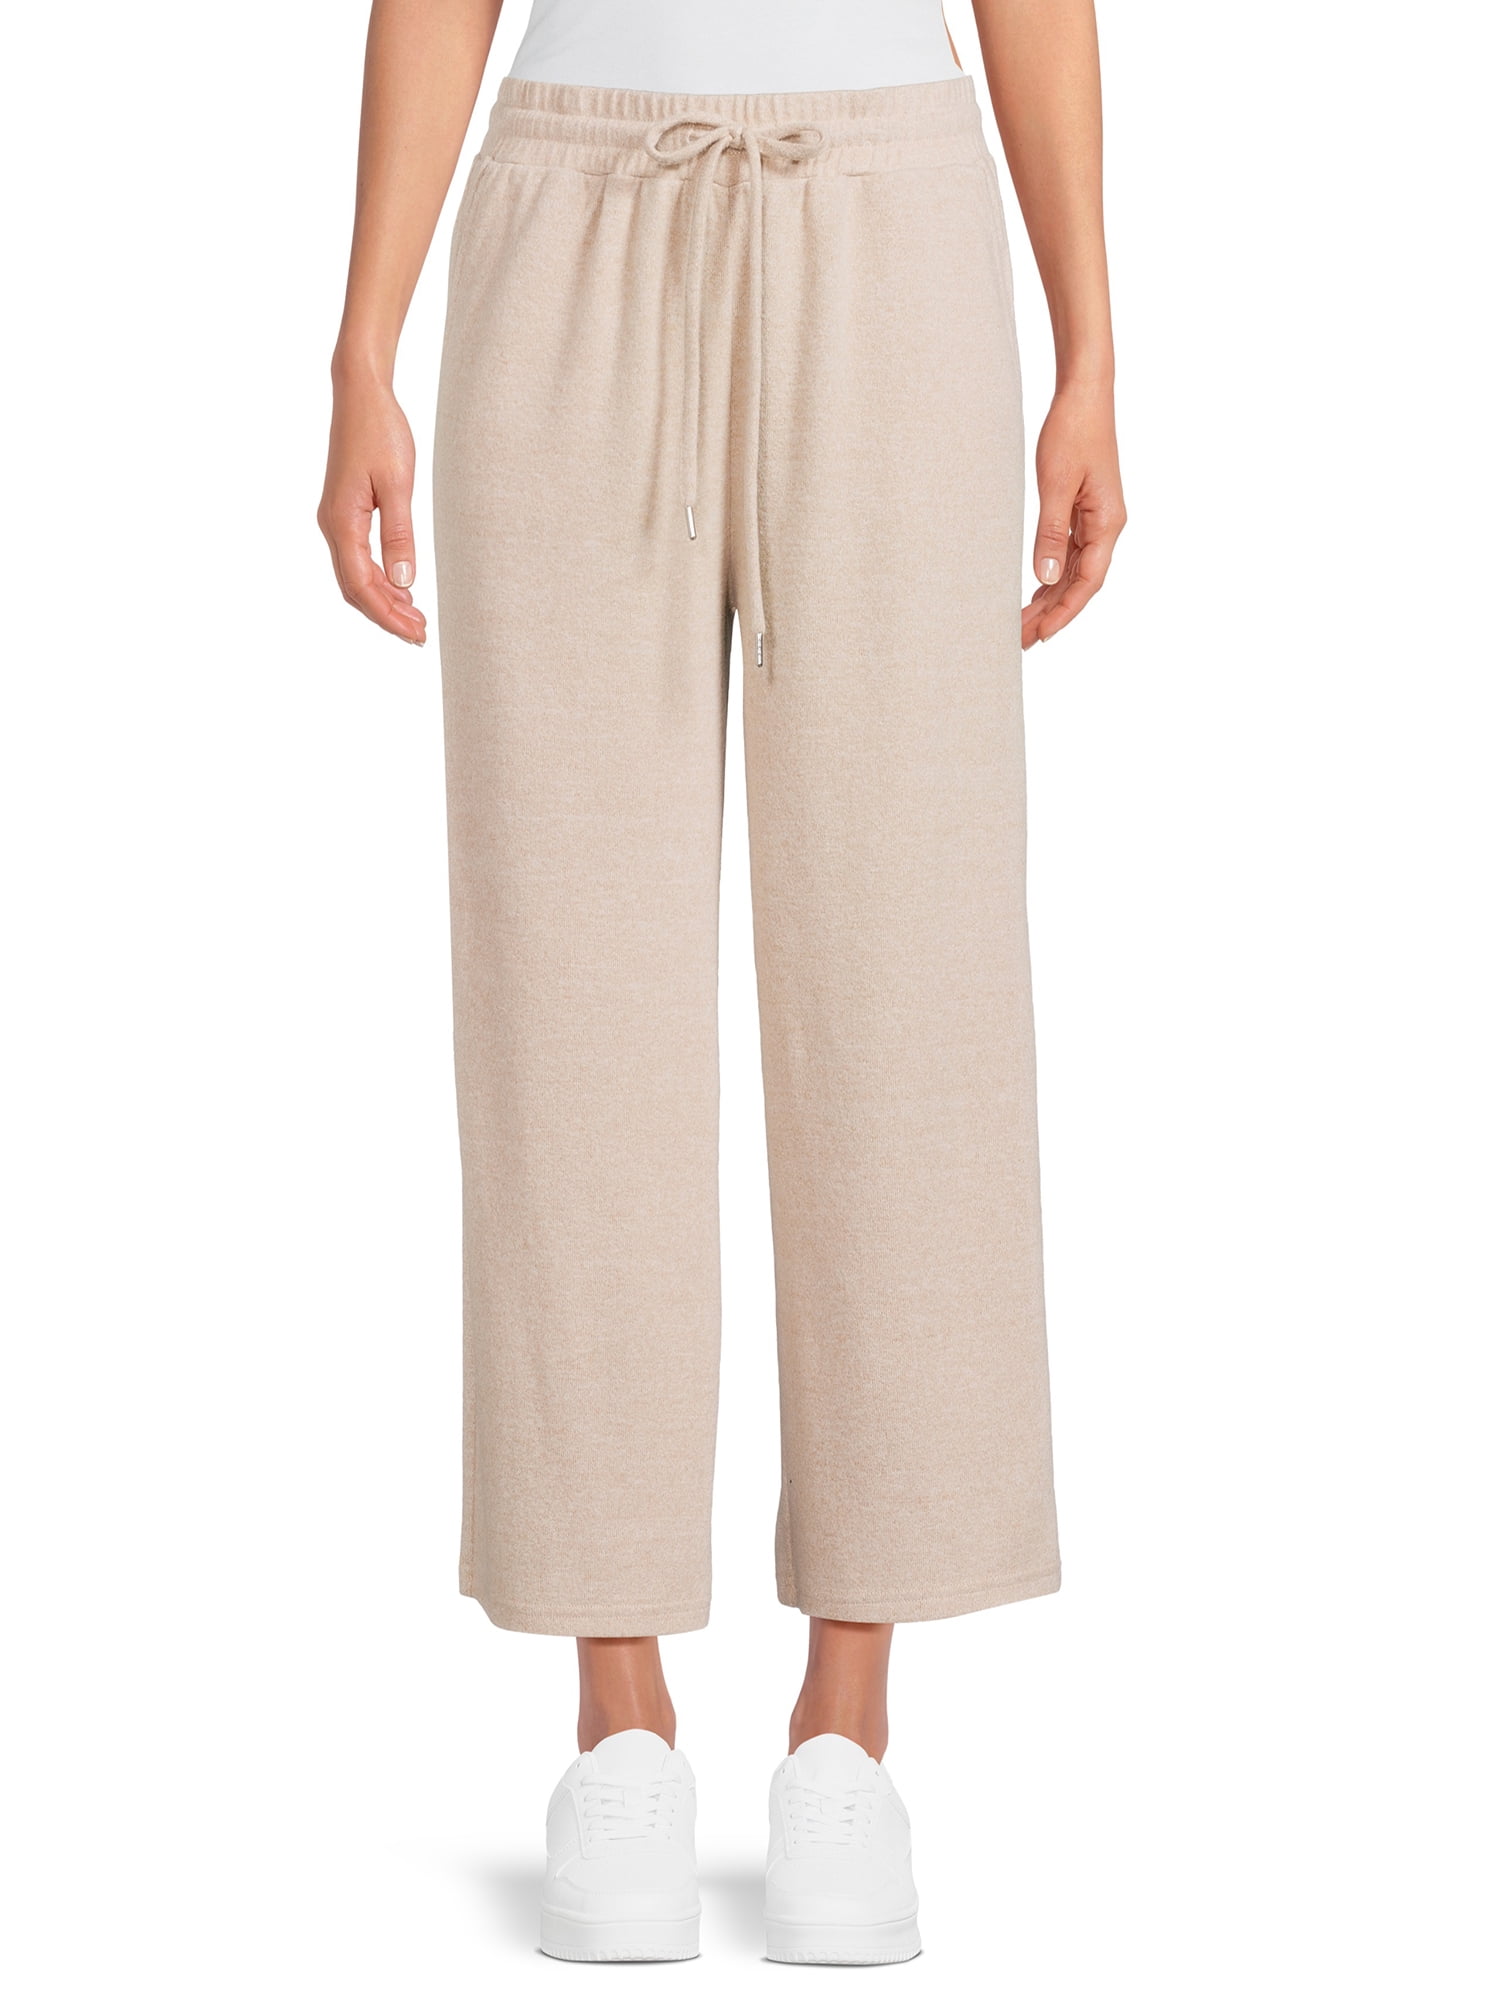 Time And Tru Ivory Stretch Pull On Pants Women's Size Medium - beyond  exchange